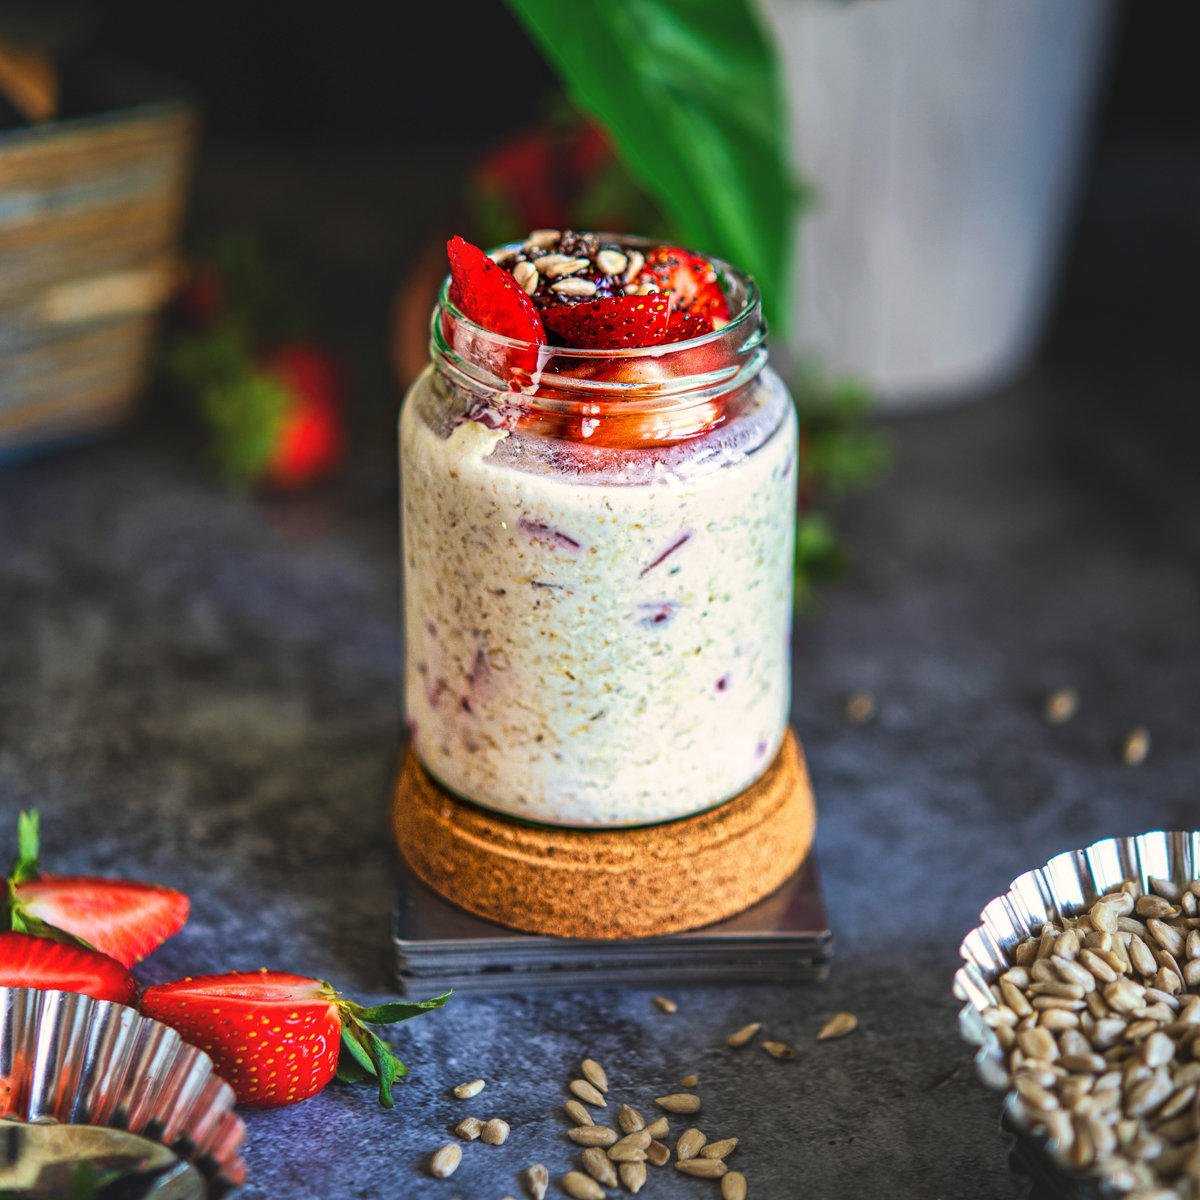 https://www.mygingergarlickitchen.com/wp-content/rich-markup-images/1x1/1x1-strawberry-overnight-oats.jpg